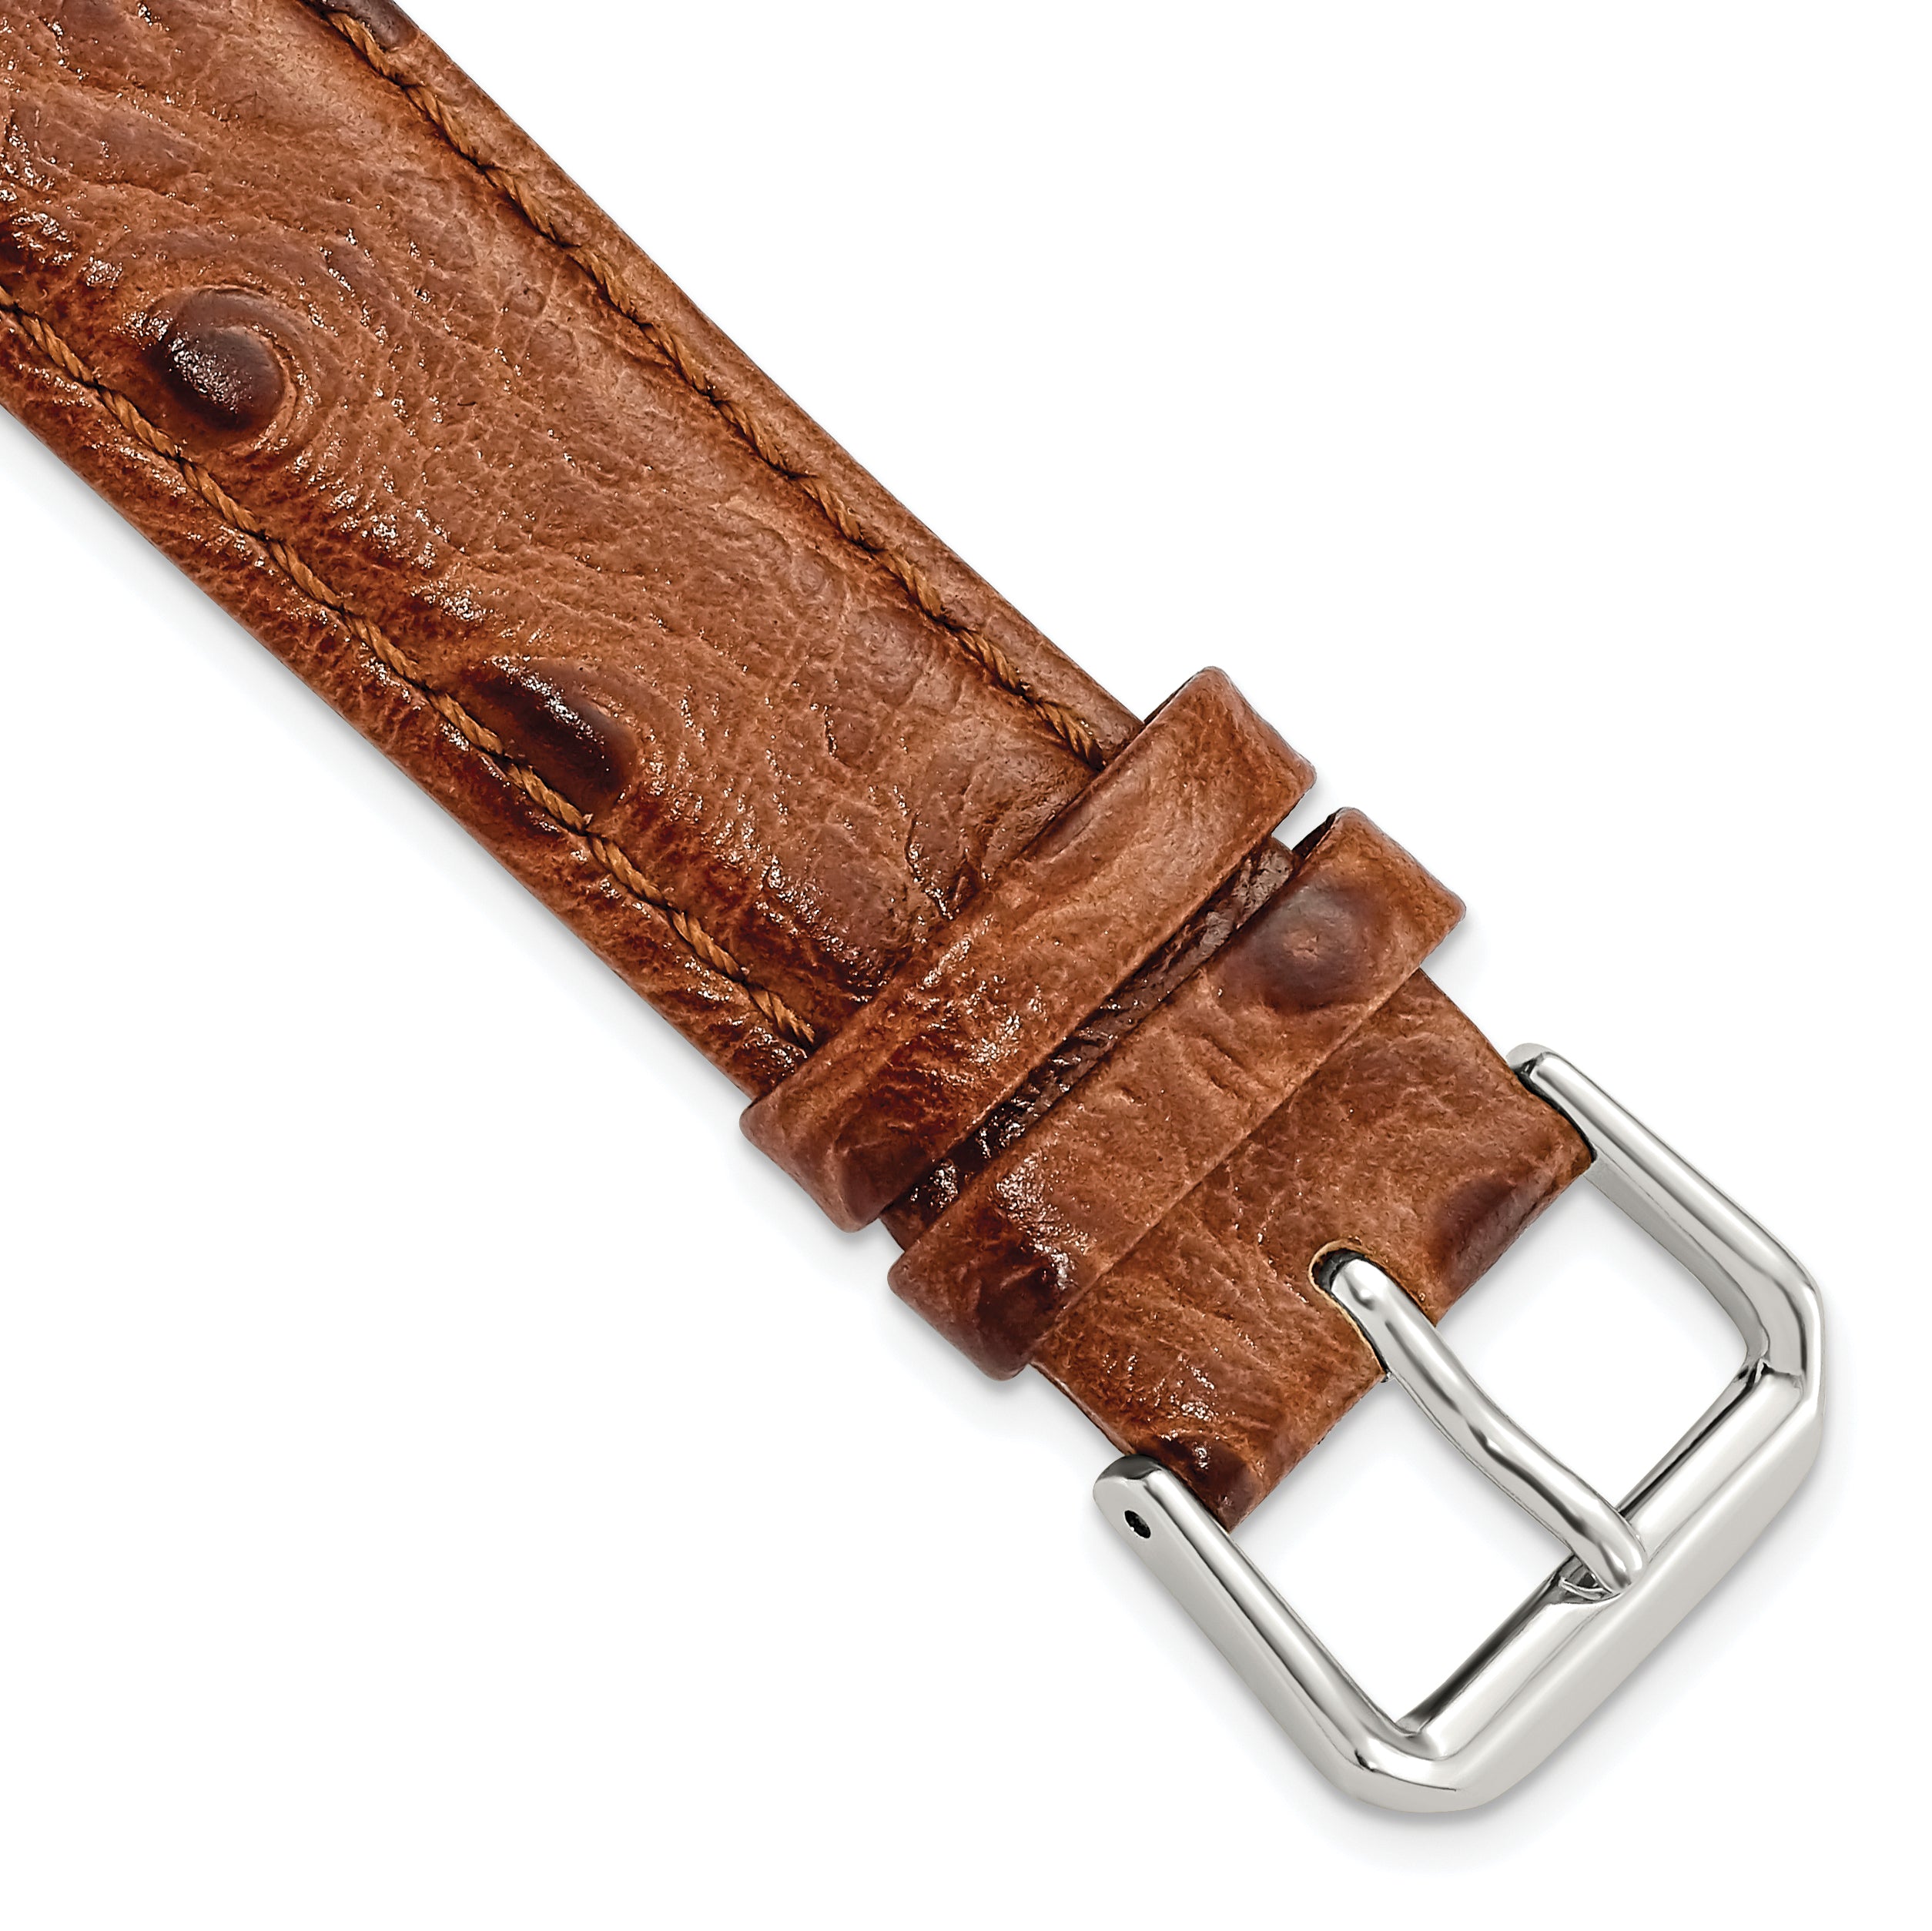 DeBeer 18mm Havana Ostrich Grain Leather with Silver-tone Buckle 7.5 inch Watch Band